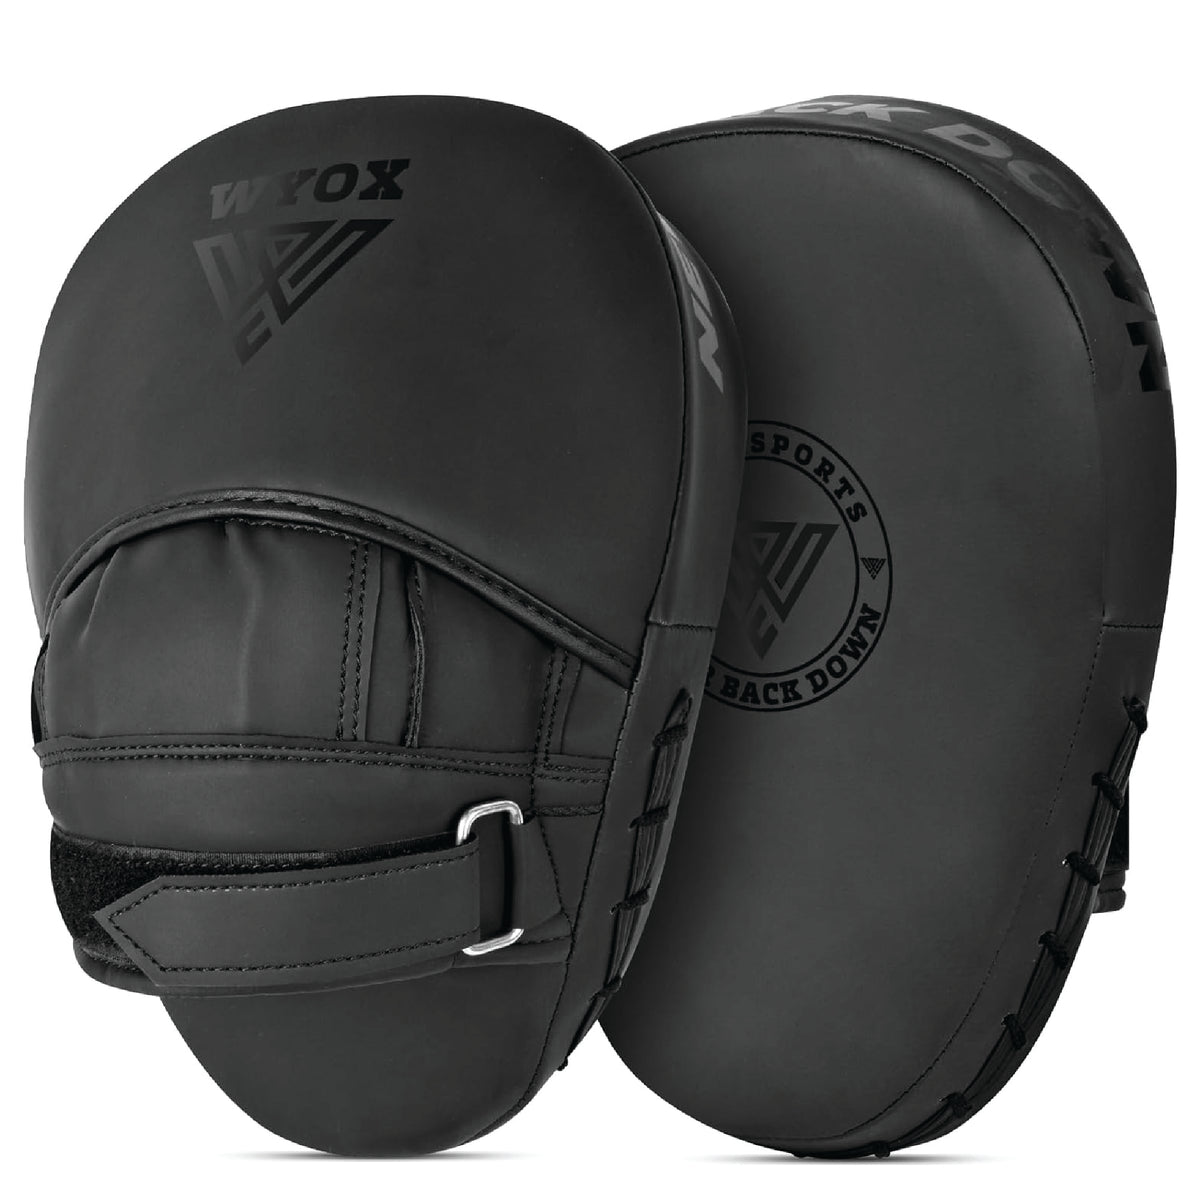 Boxing Focus Pads - WYOX SPORTS